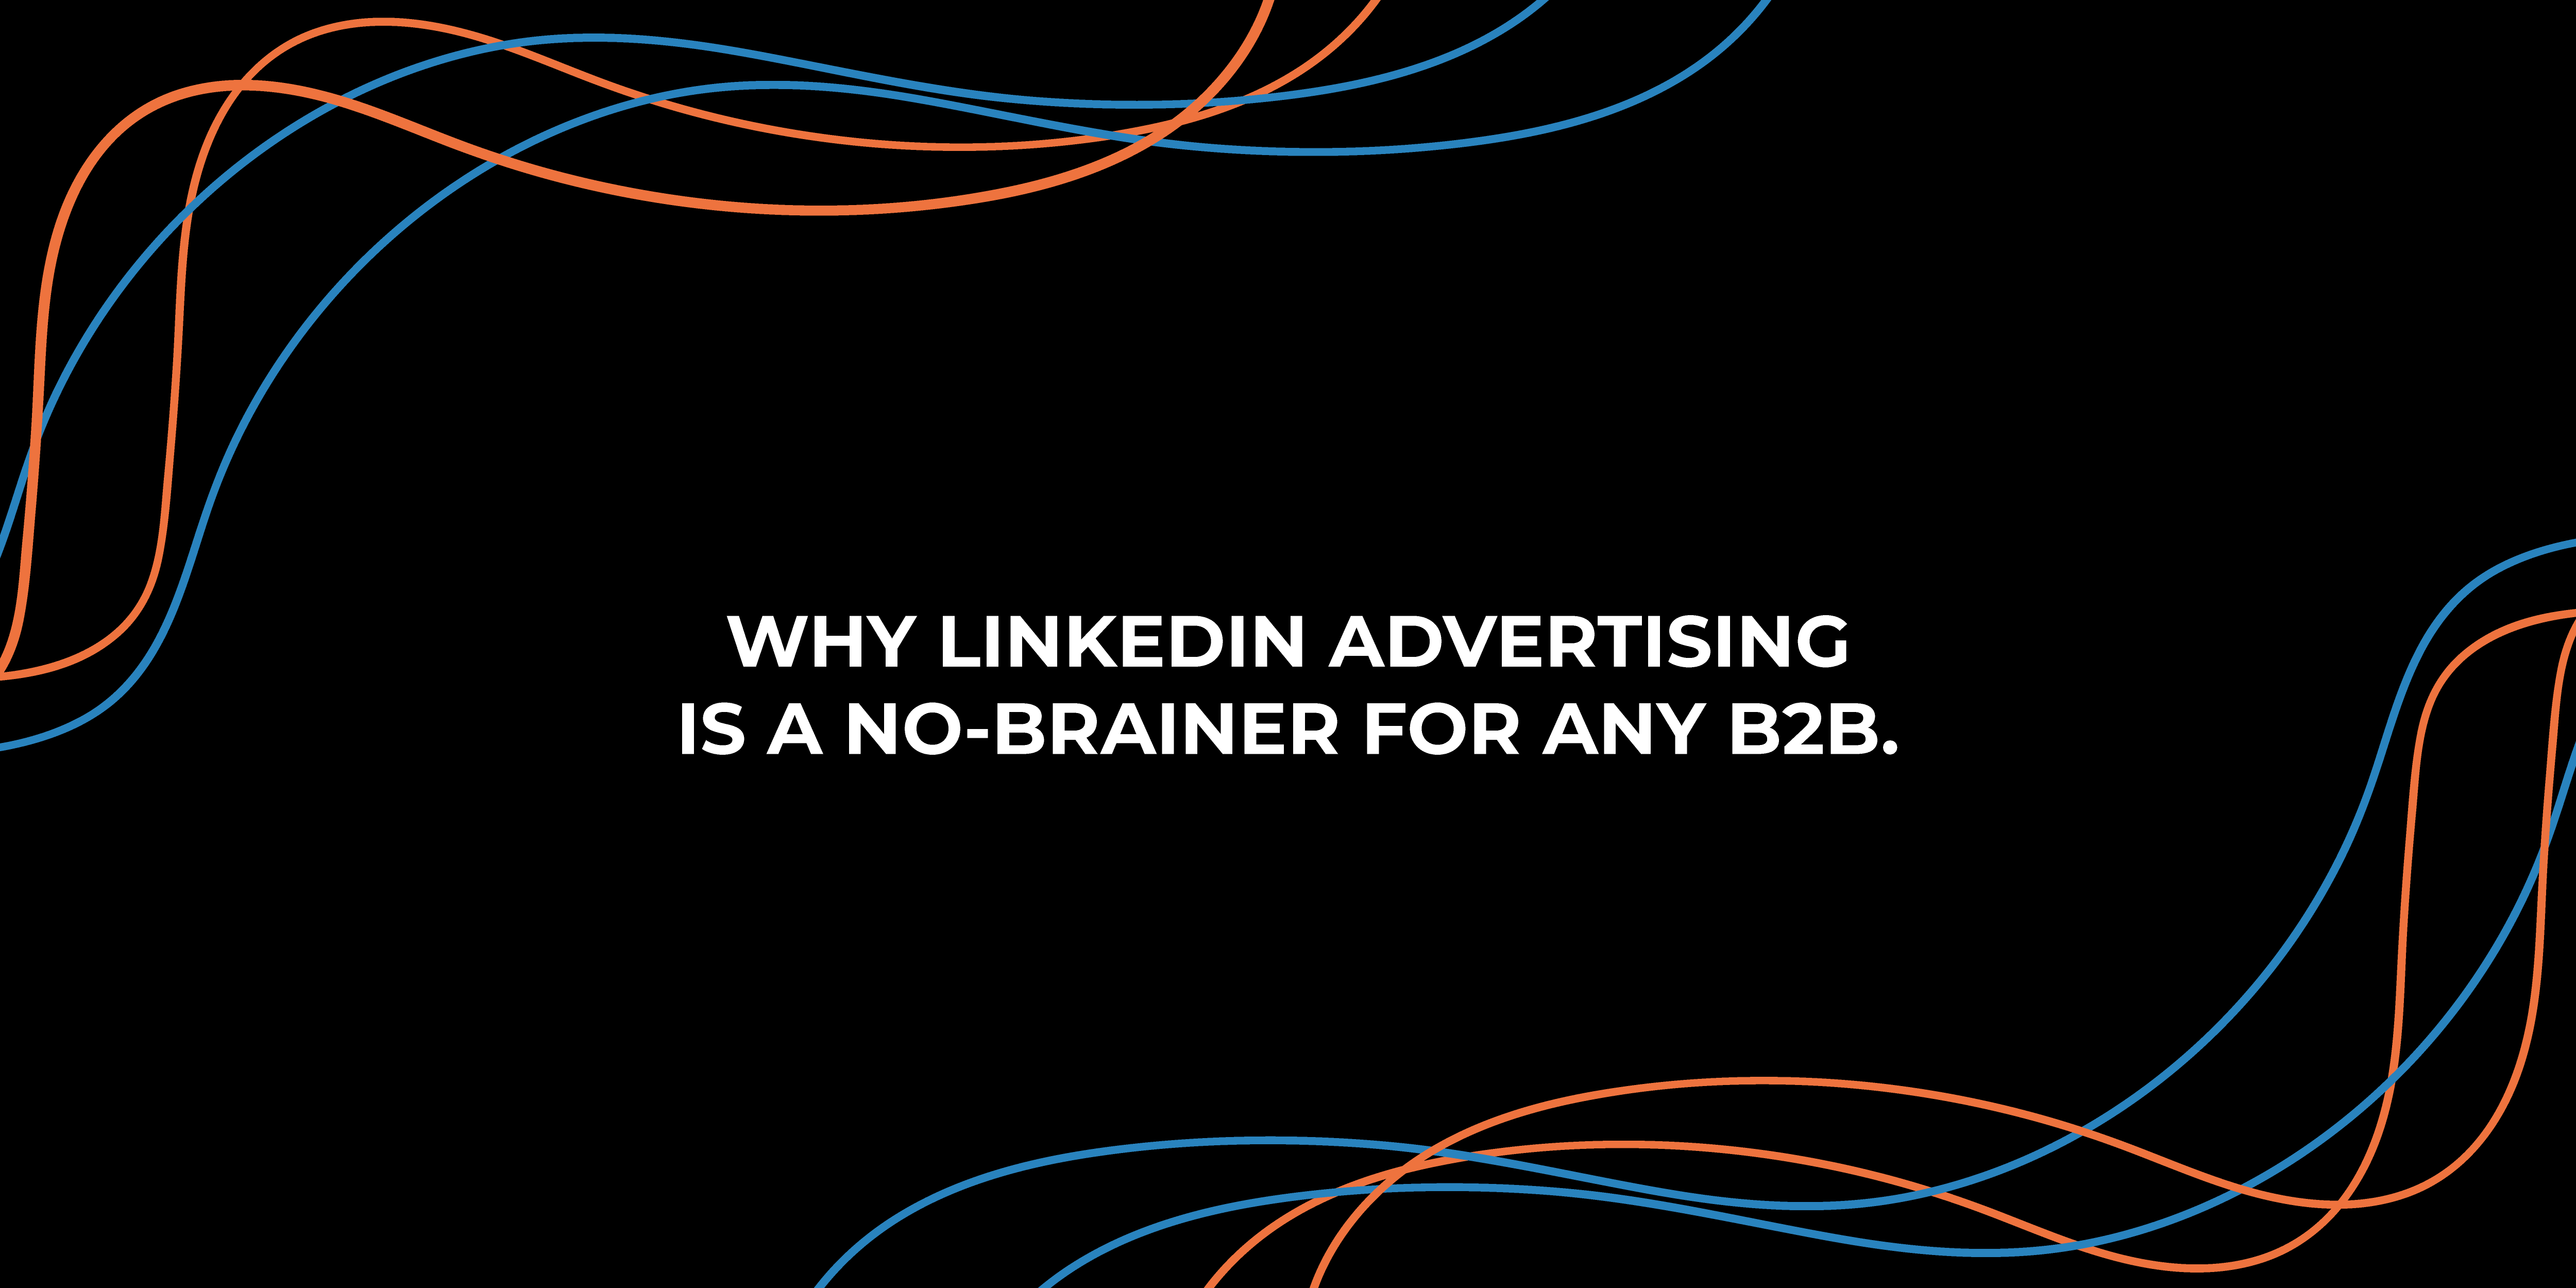 Why LinkedIn Advertising is a no-brainer for any B2B